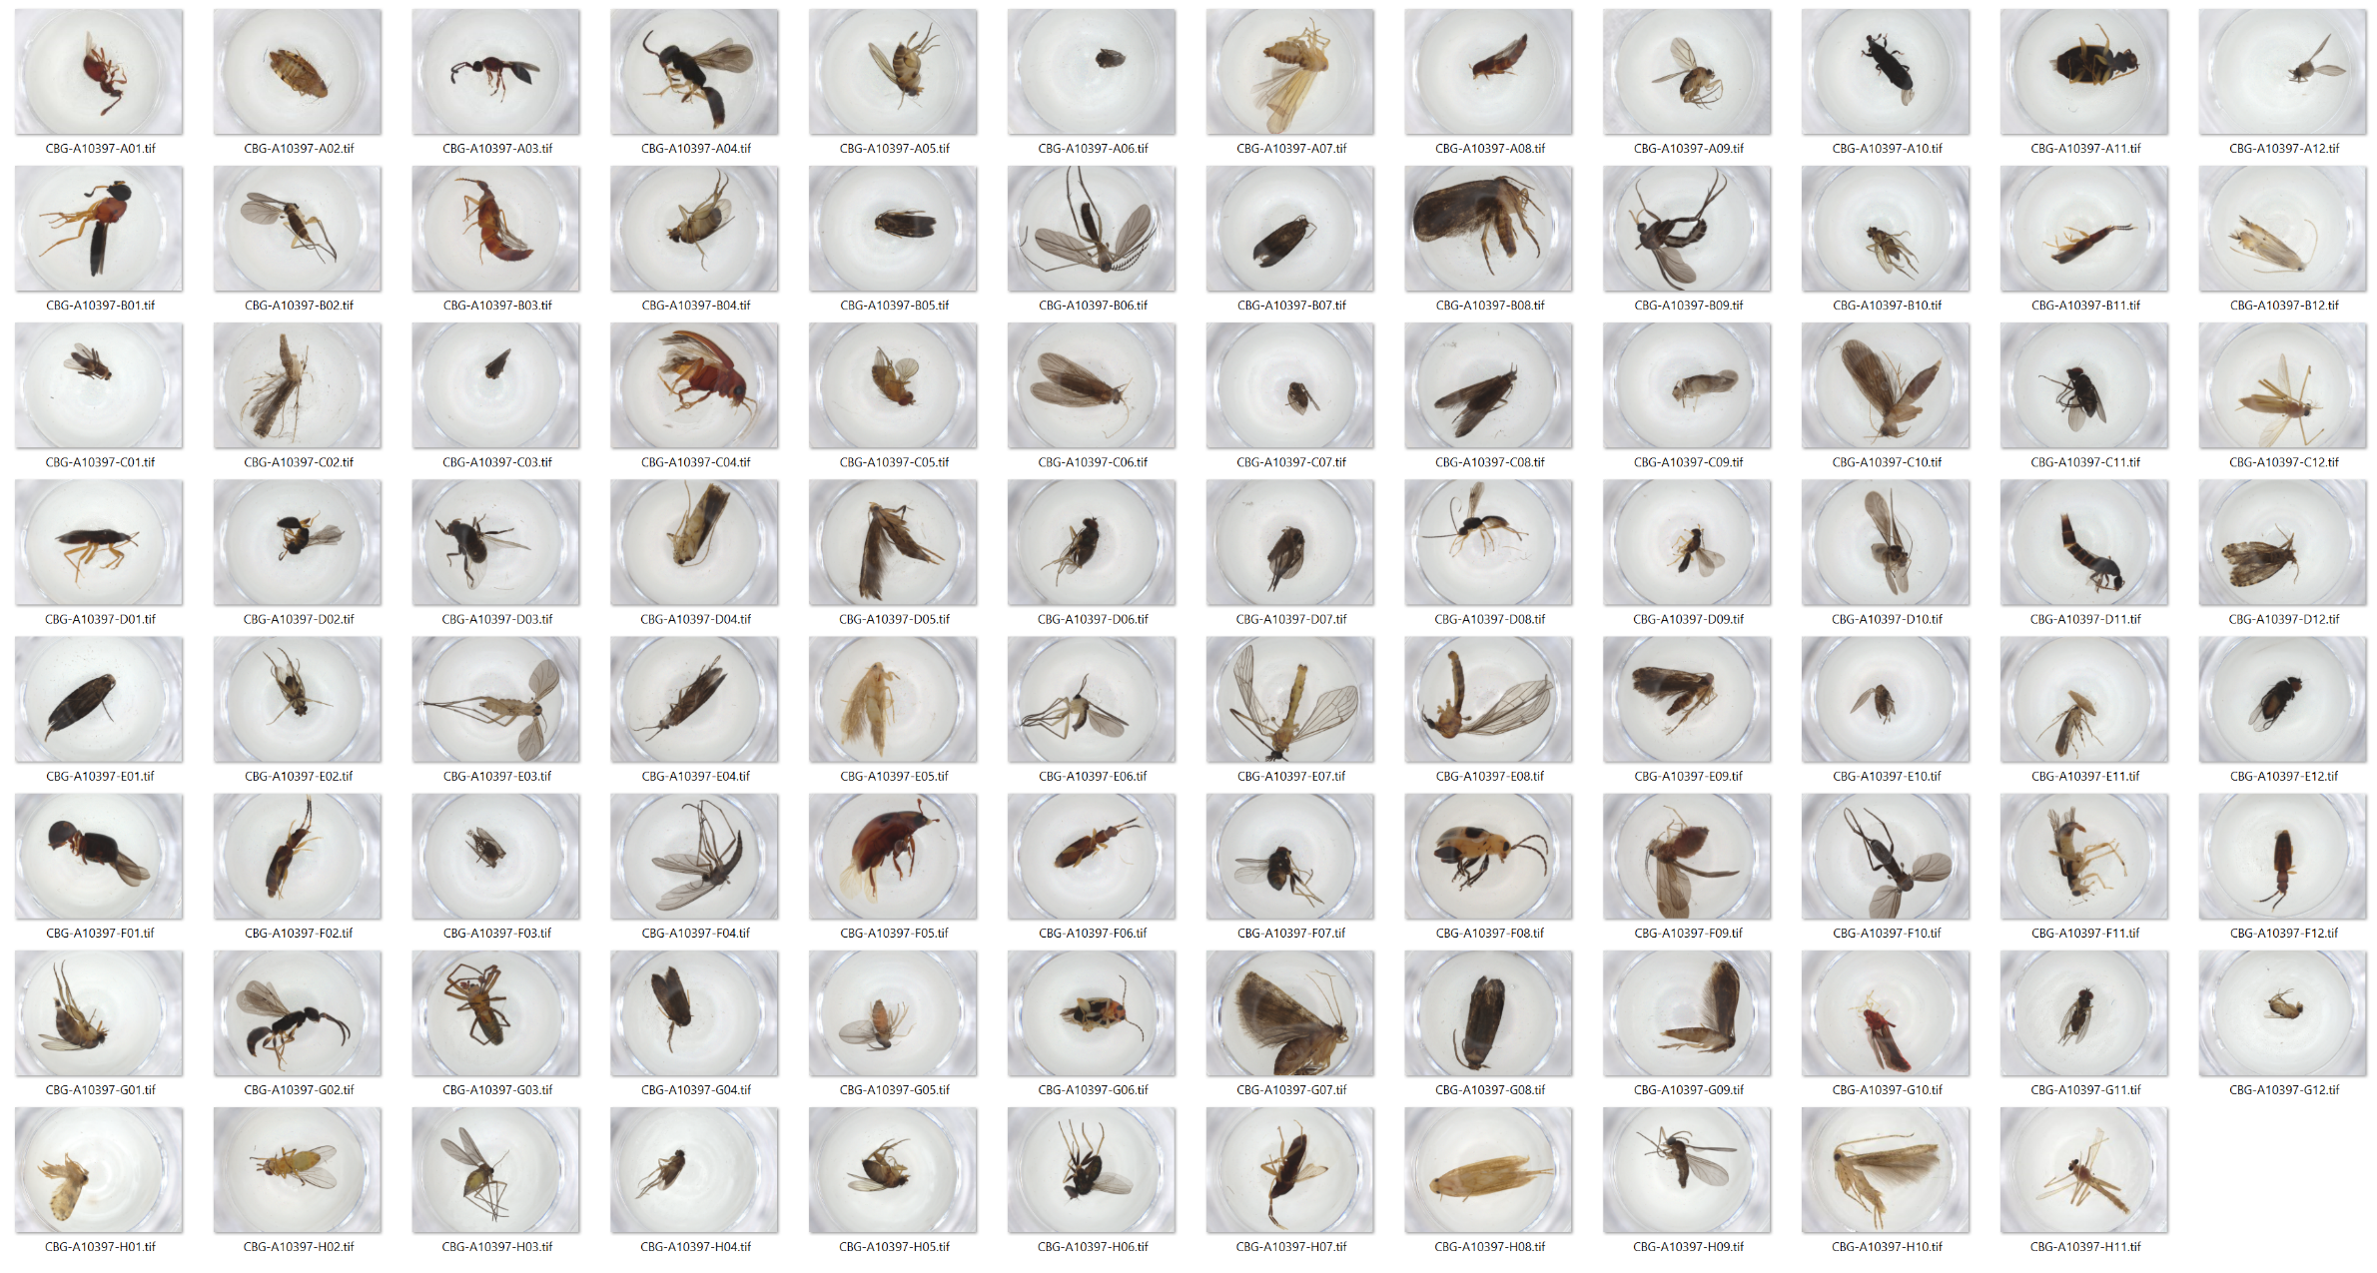 This dataset comprises of 5,675,731 images of mostly terrestrial arthropod specimens. The dataset contains images for specimens sampled from 1,698 sites in 48 countries. The image size is 2880 x 2160 pixels before cropping. This translates into an average size of 17.9MB for a tif-file and 1.88 MB for a jpg-file. The figure shows an array of 95 images taken with a using a Keyence VHX-7000 Digital Microscope system, the empty space at the bottom right corresponds to an empty control well in the source microplate.